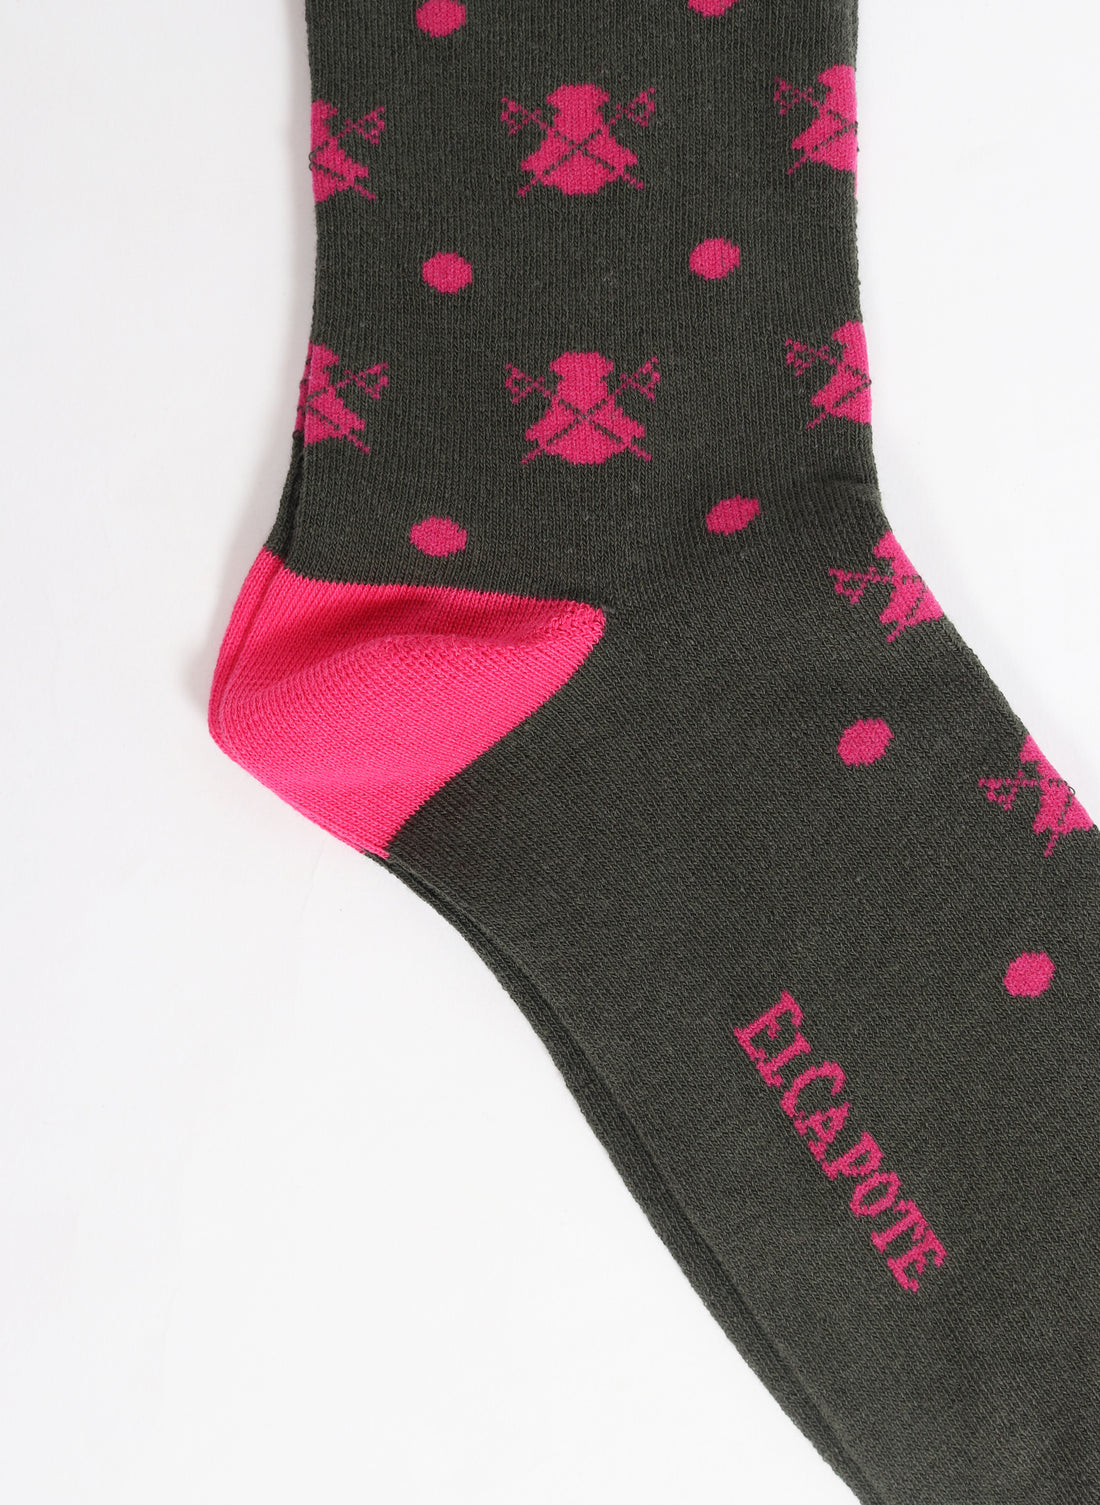 Kaki Green Sock with Capotes and Polka Dots in Pink